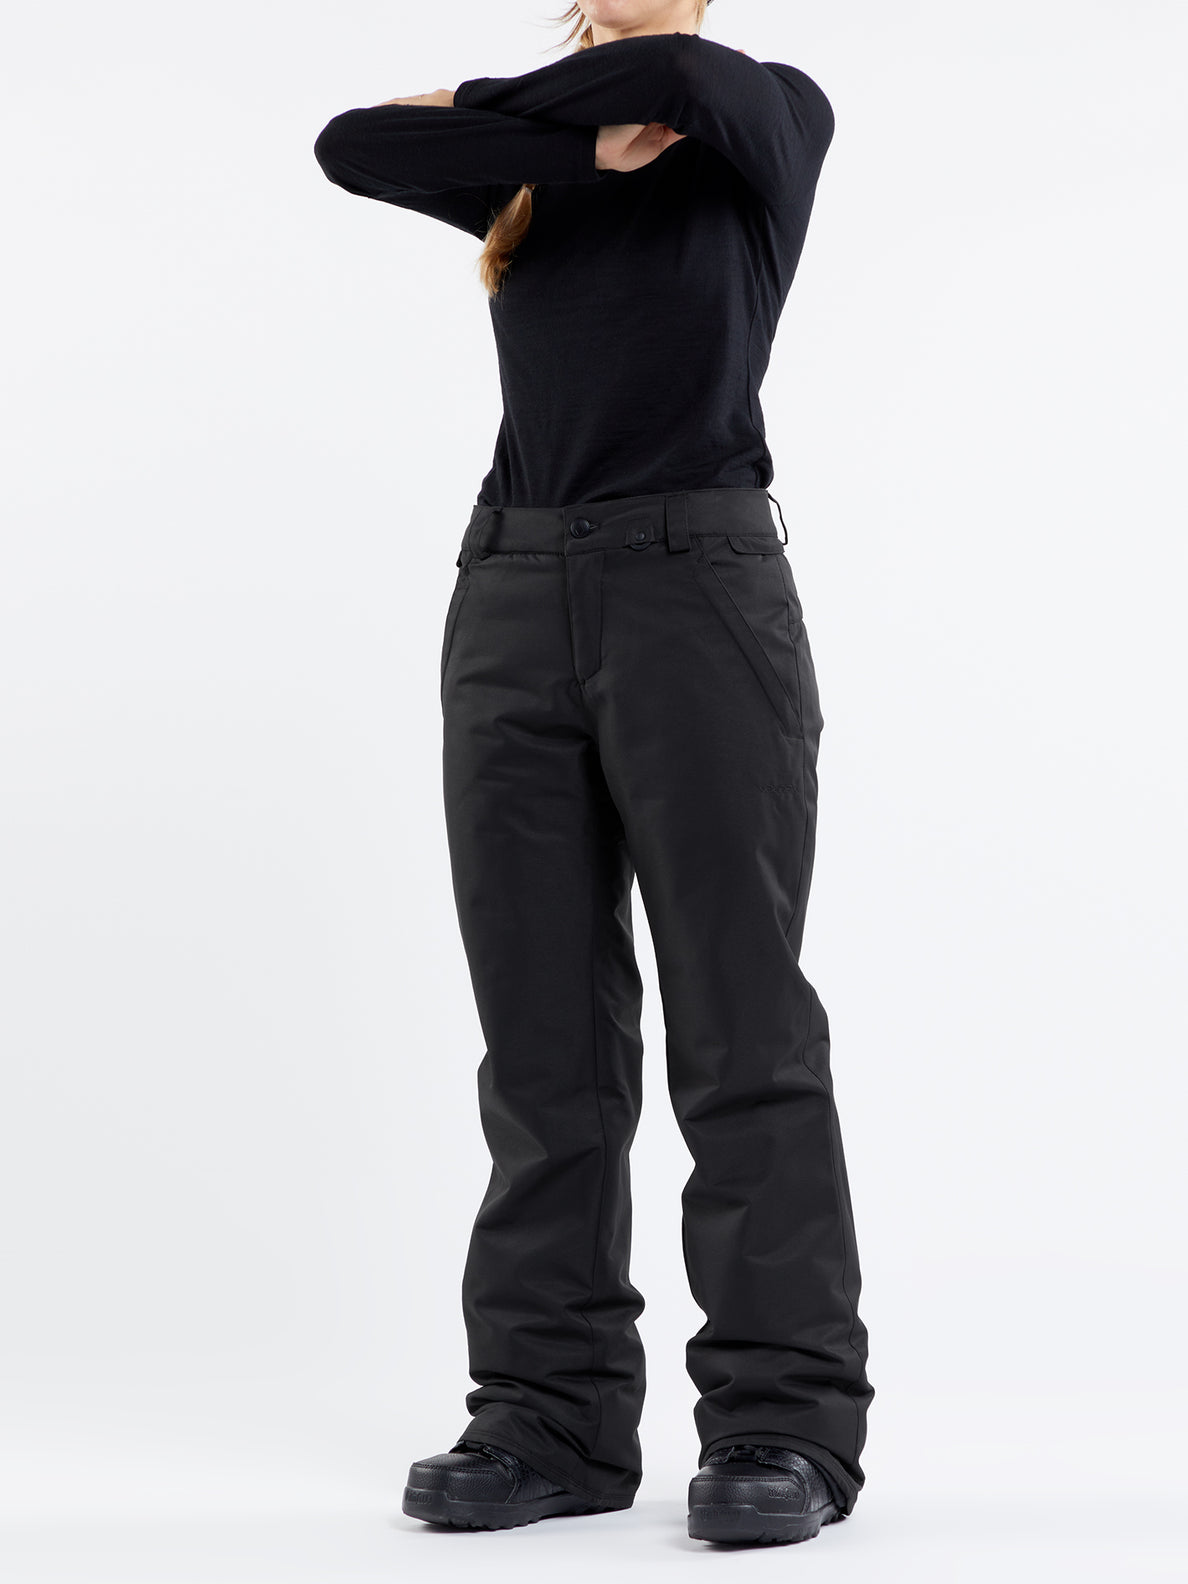 Womens Frochickie Insulated Pants - Black (H1252403_BLK) [44]